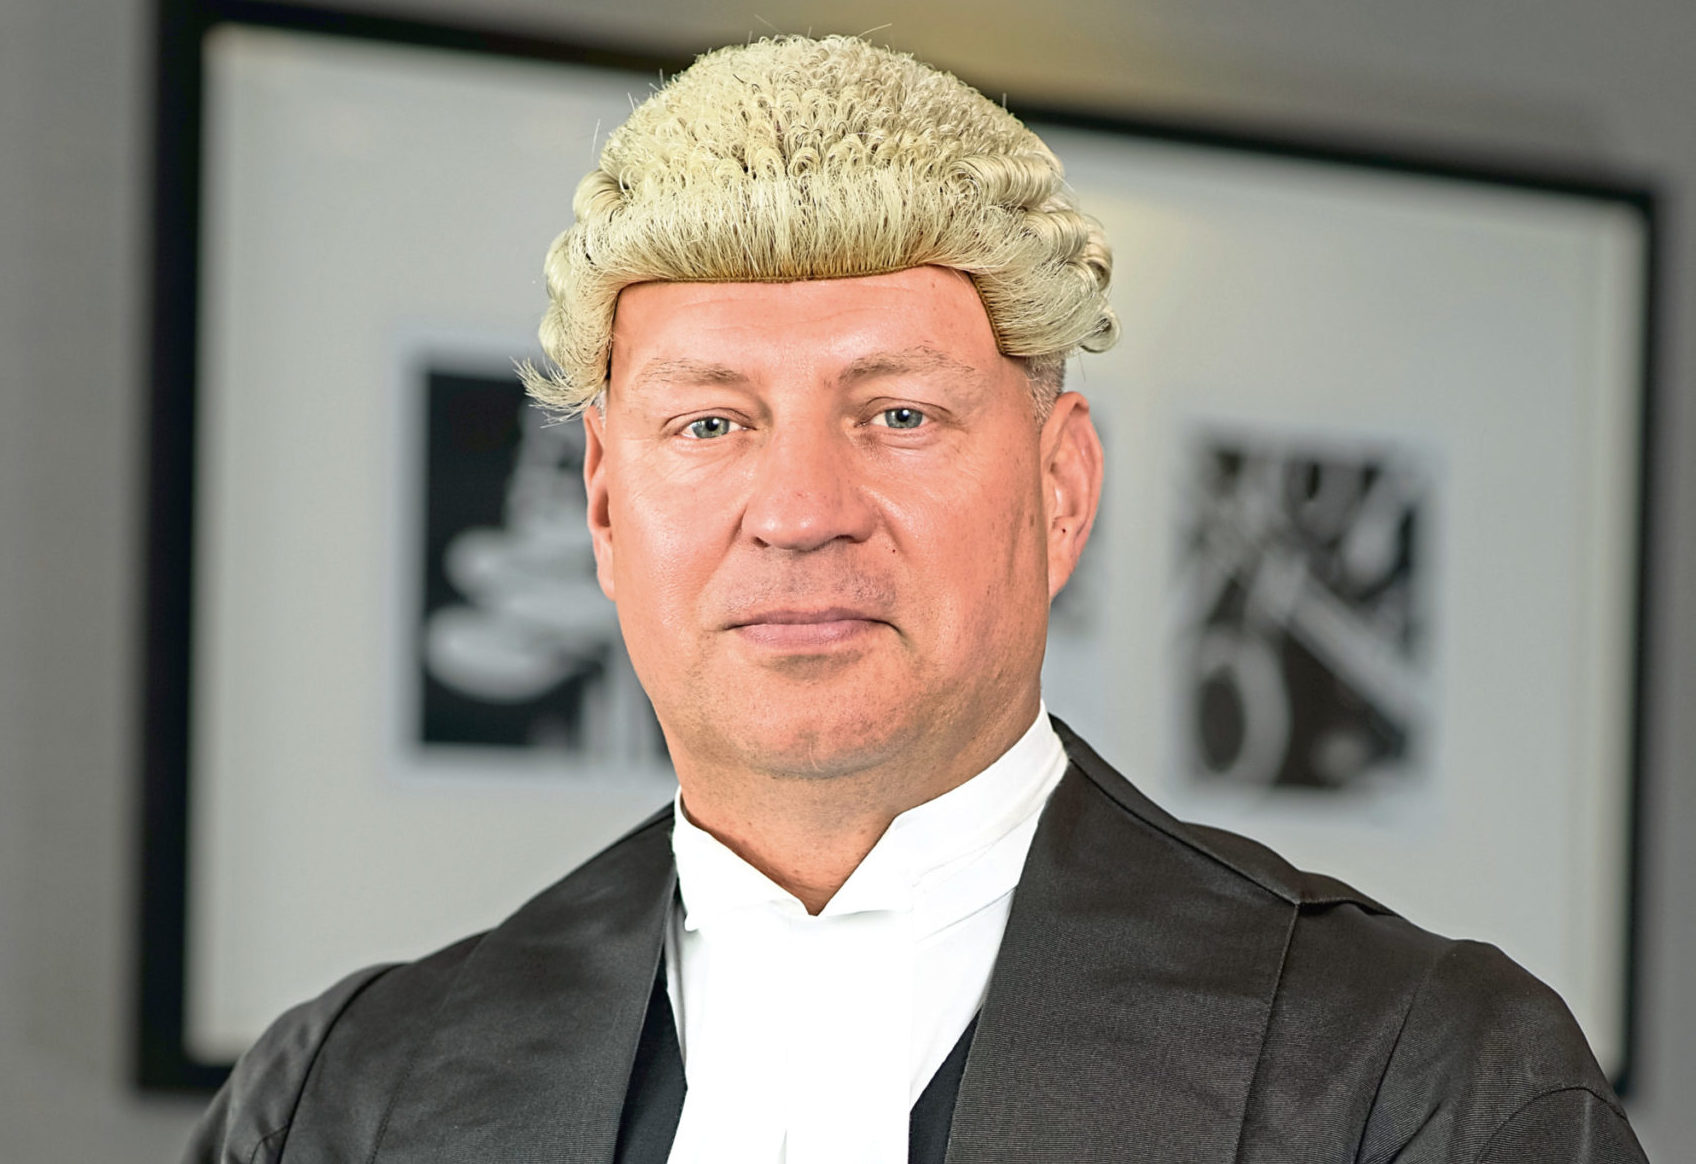 Barrister Scots justice should inspire reform across Britain The